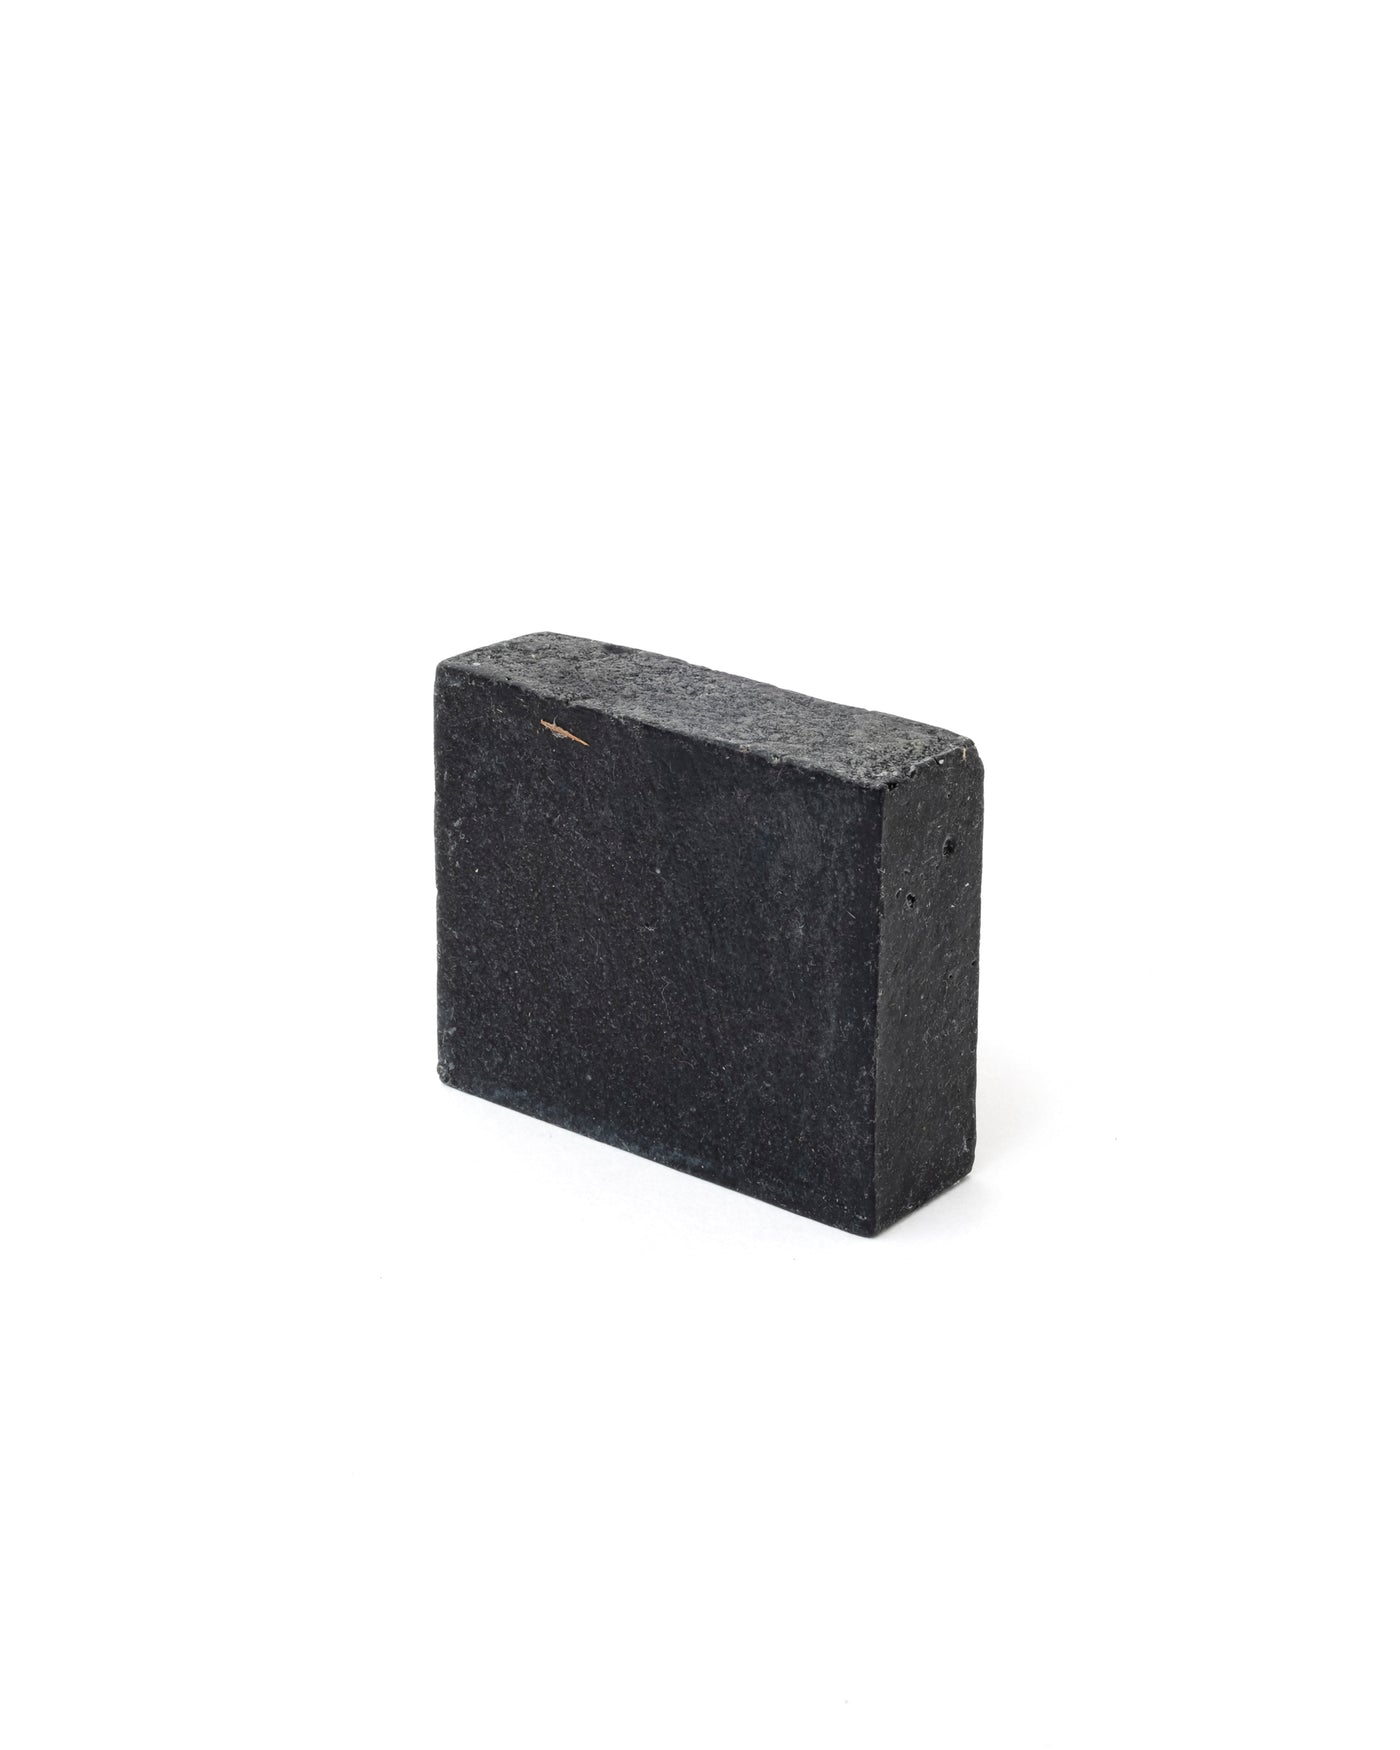 Three By One Activated Charcoal Cleansing Bar for face and body